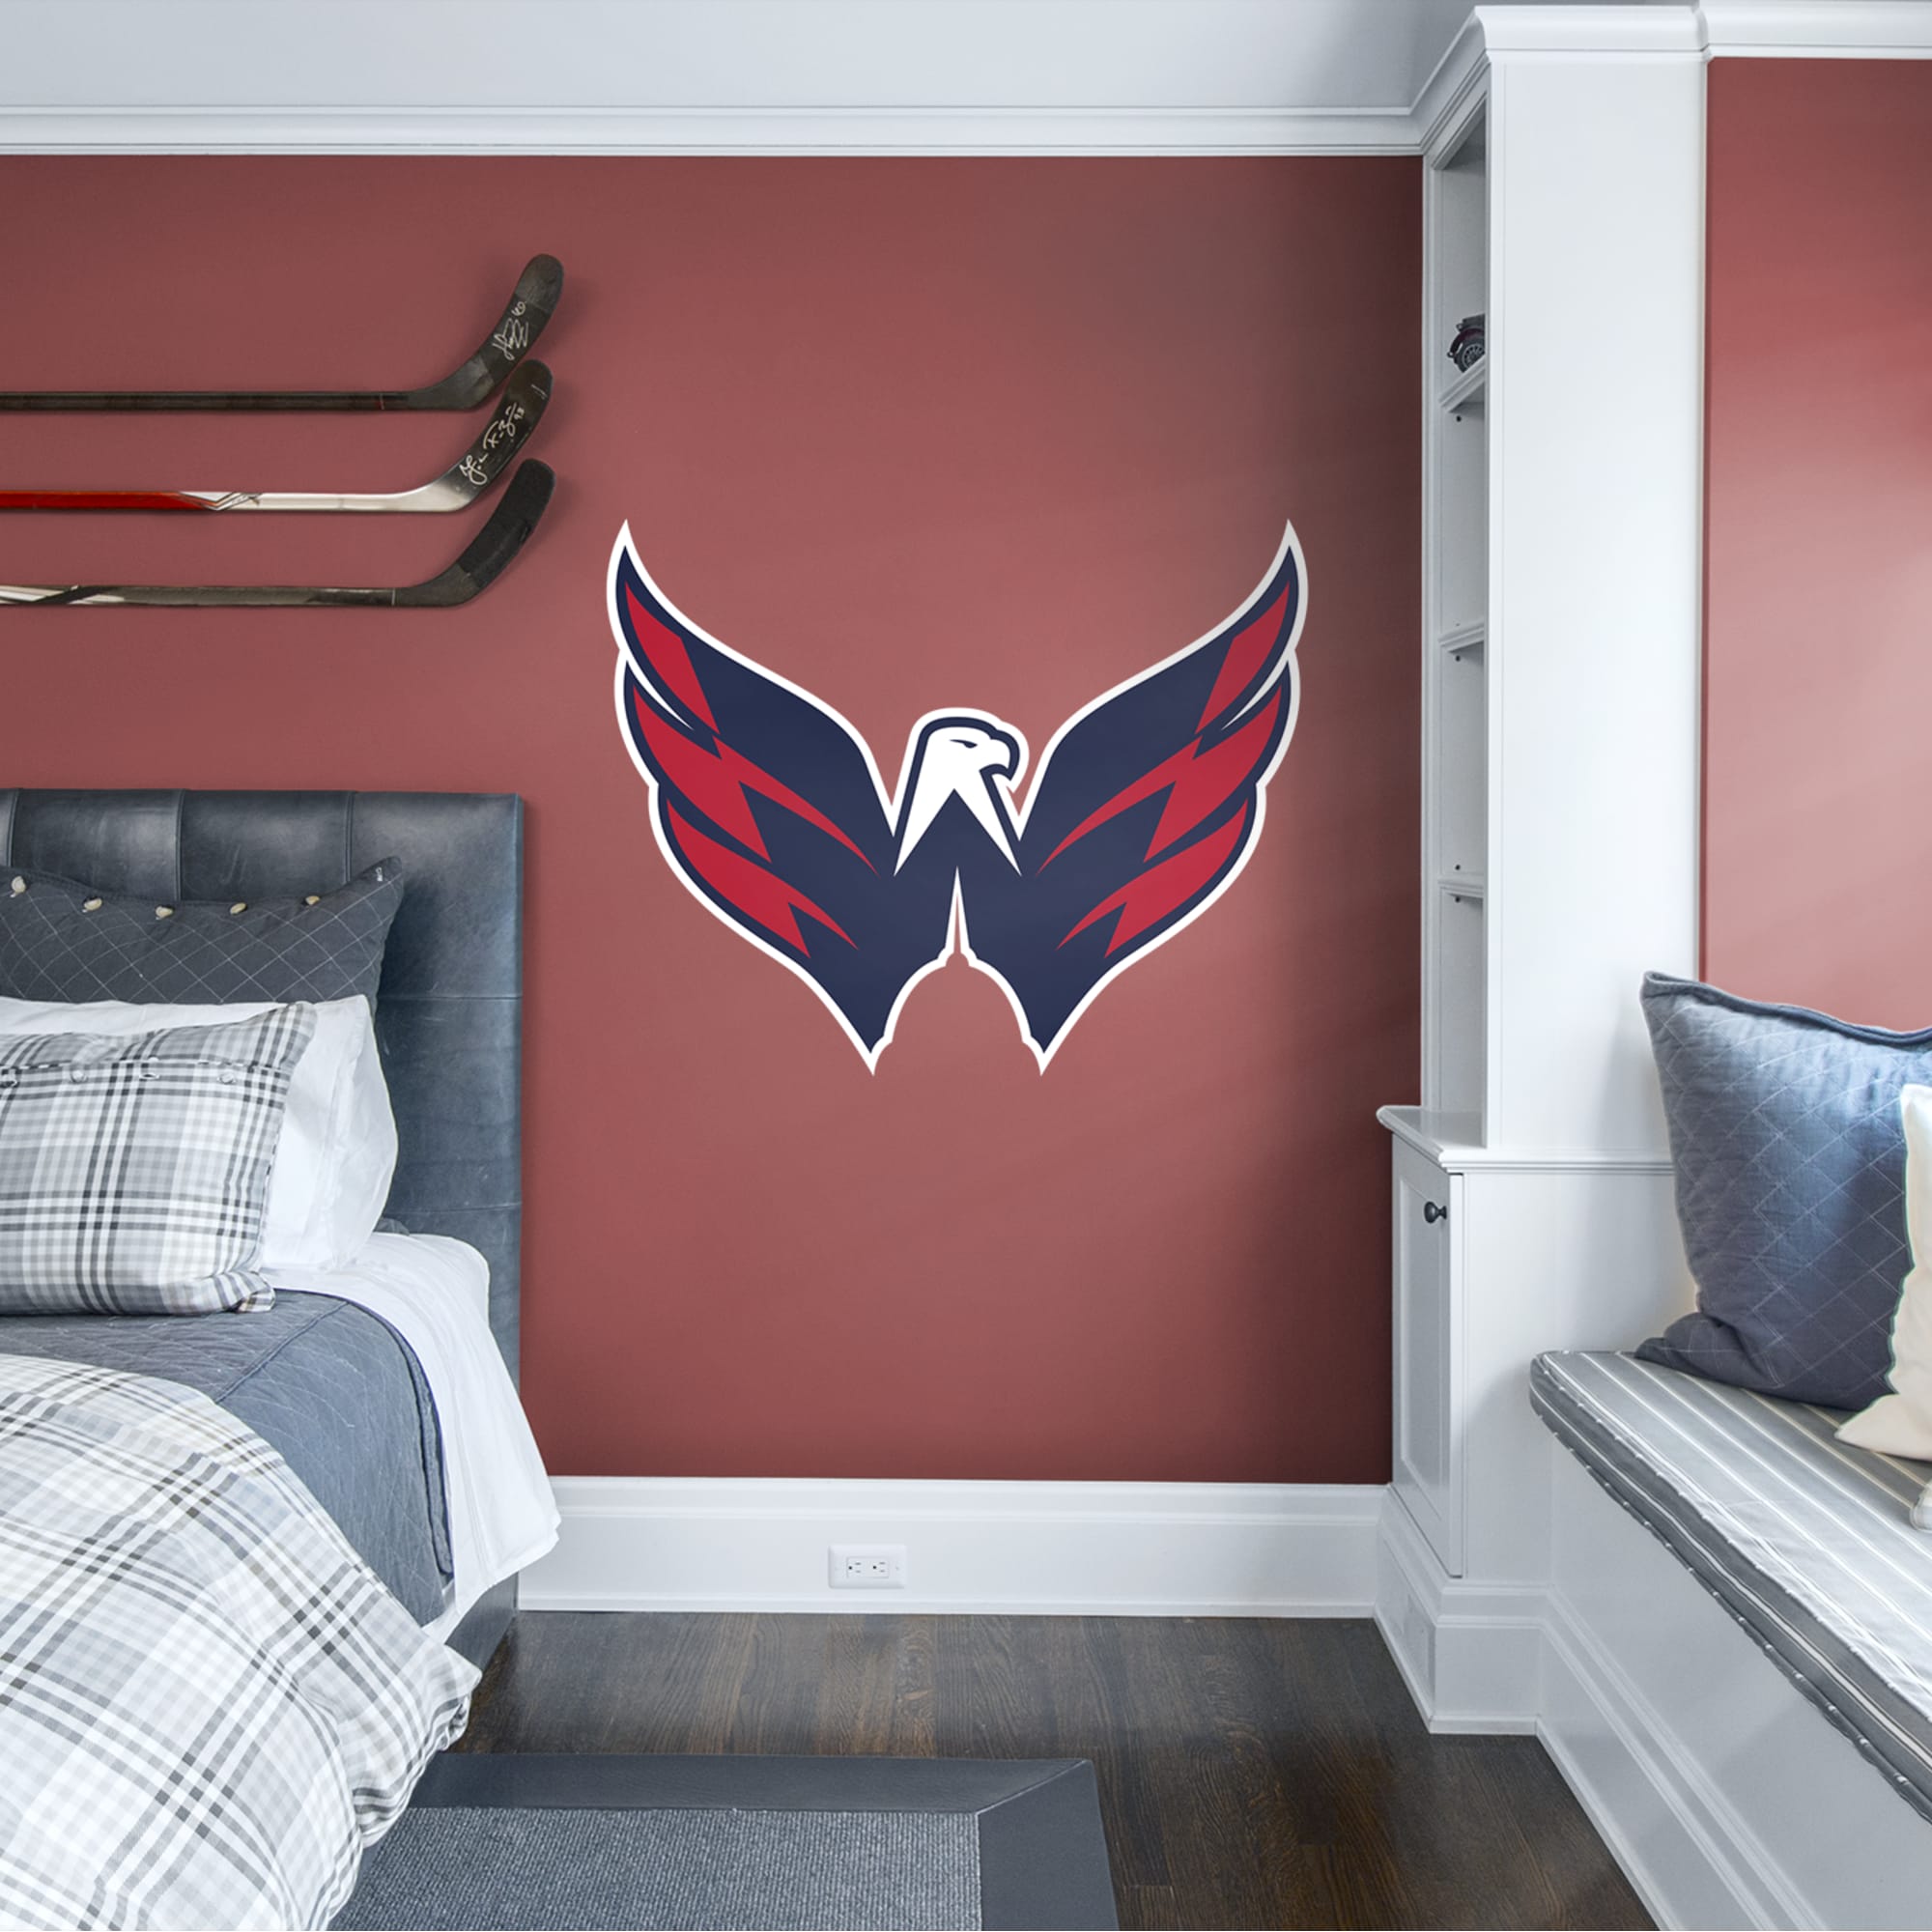 Washington Capitals: Alternate Logo - Officially Licensed NHL Removable Wall Decal 44.0"W x 38.0"H by Fathead | Vinyl